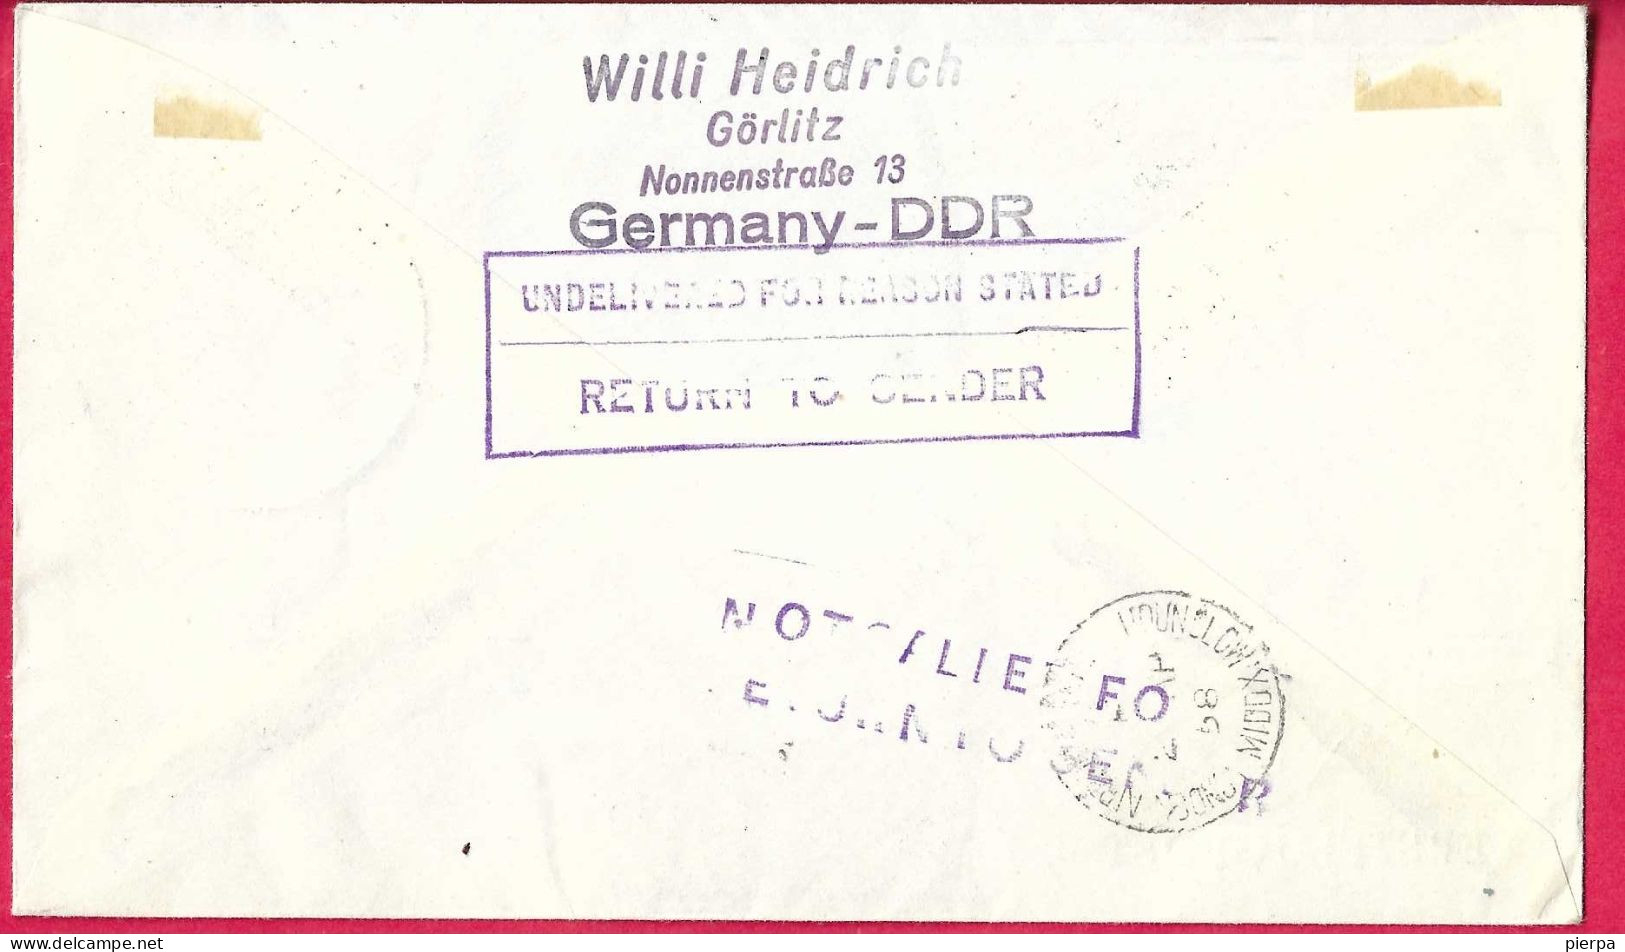 AUSTRIA - ERSTFLUG AUA  FROM WIEN TO LONDON *31.3.1958* ON OFFICIAL COVER - FROM D.D.R- - First Flight Covers